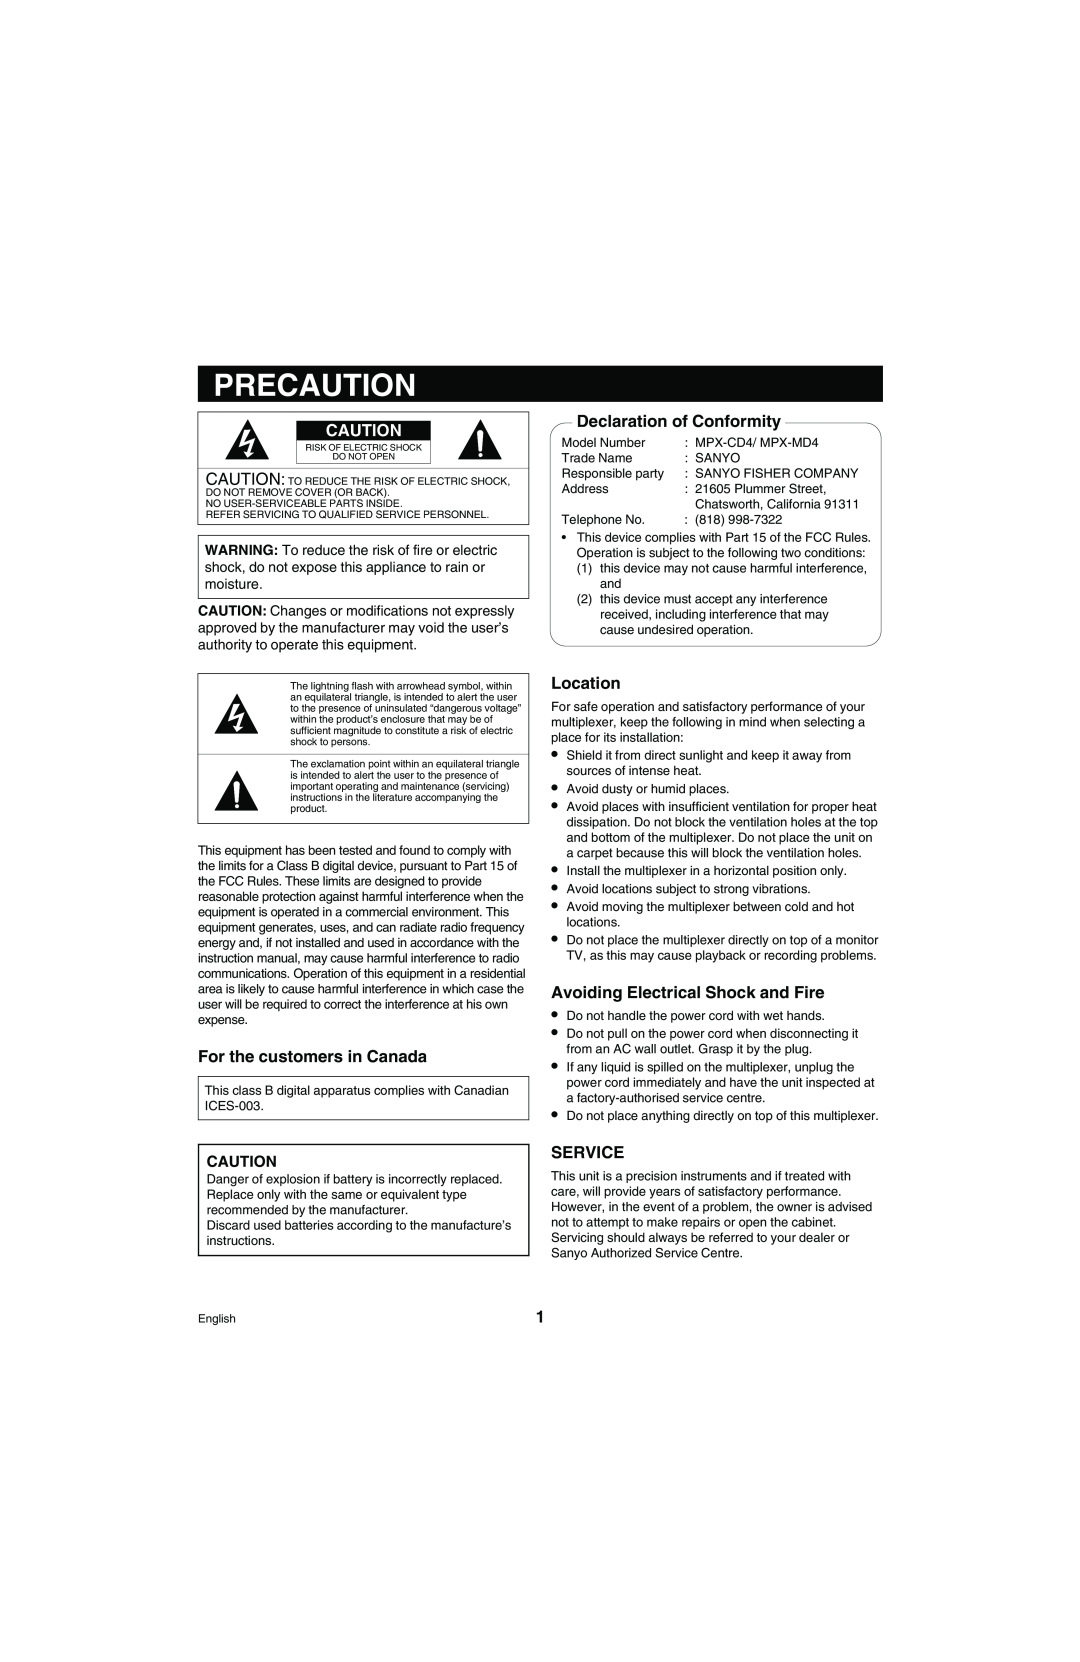 Sanyo MPX-MD4 instruction manual Precaution, For the customers in Canada, Declaration of Conformity, Location, Service 